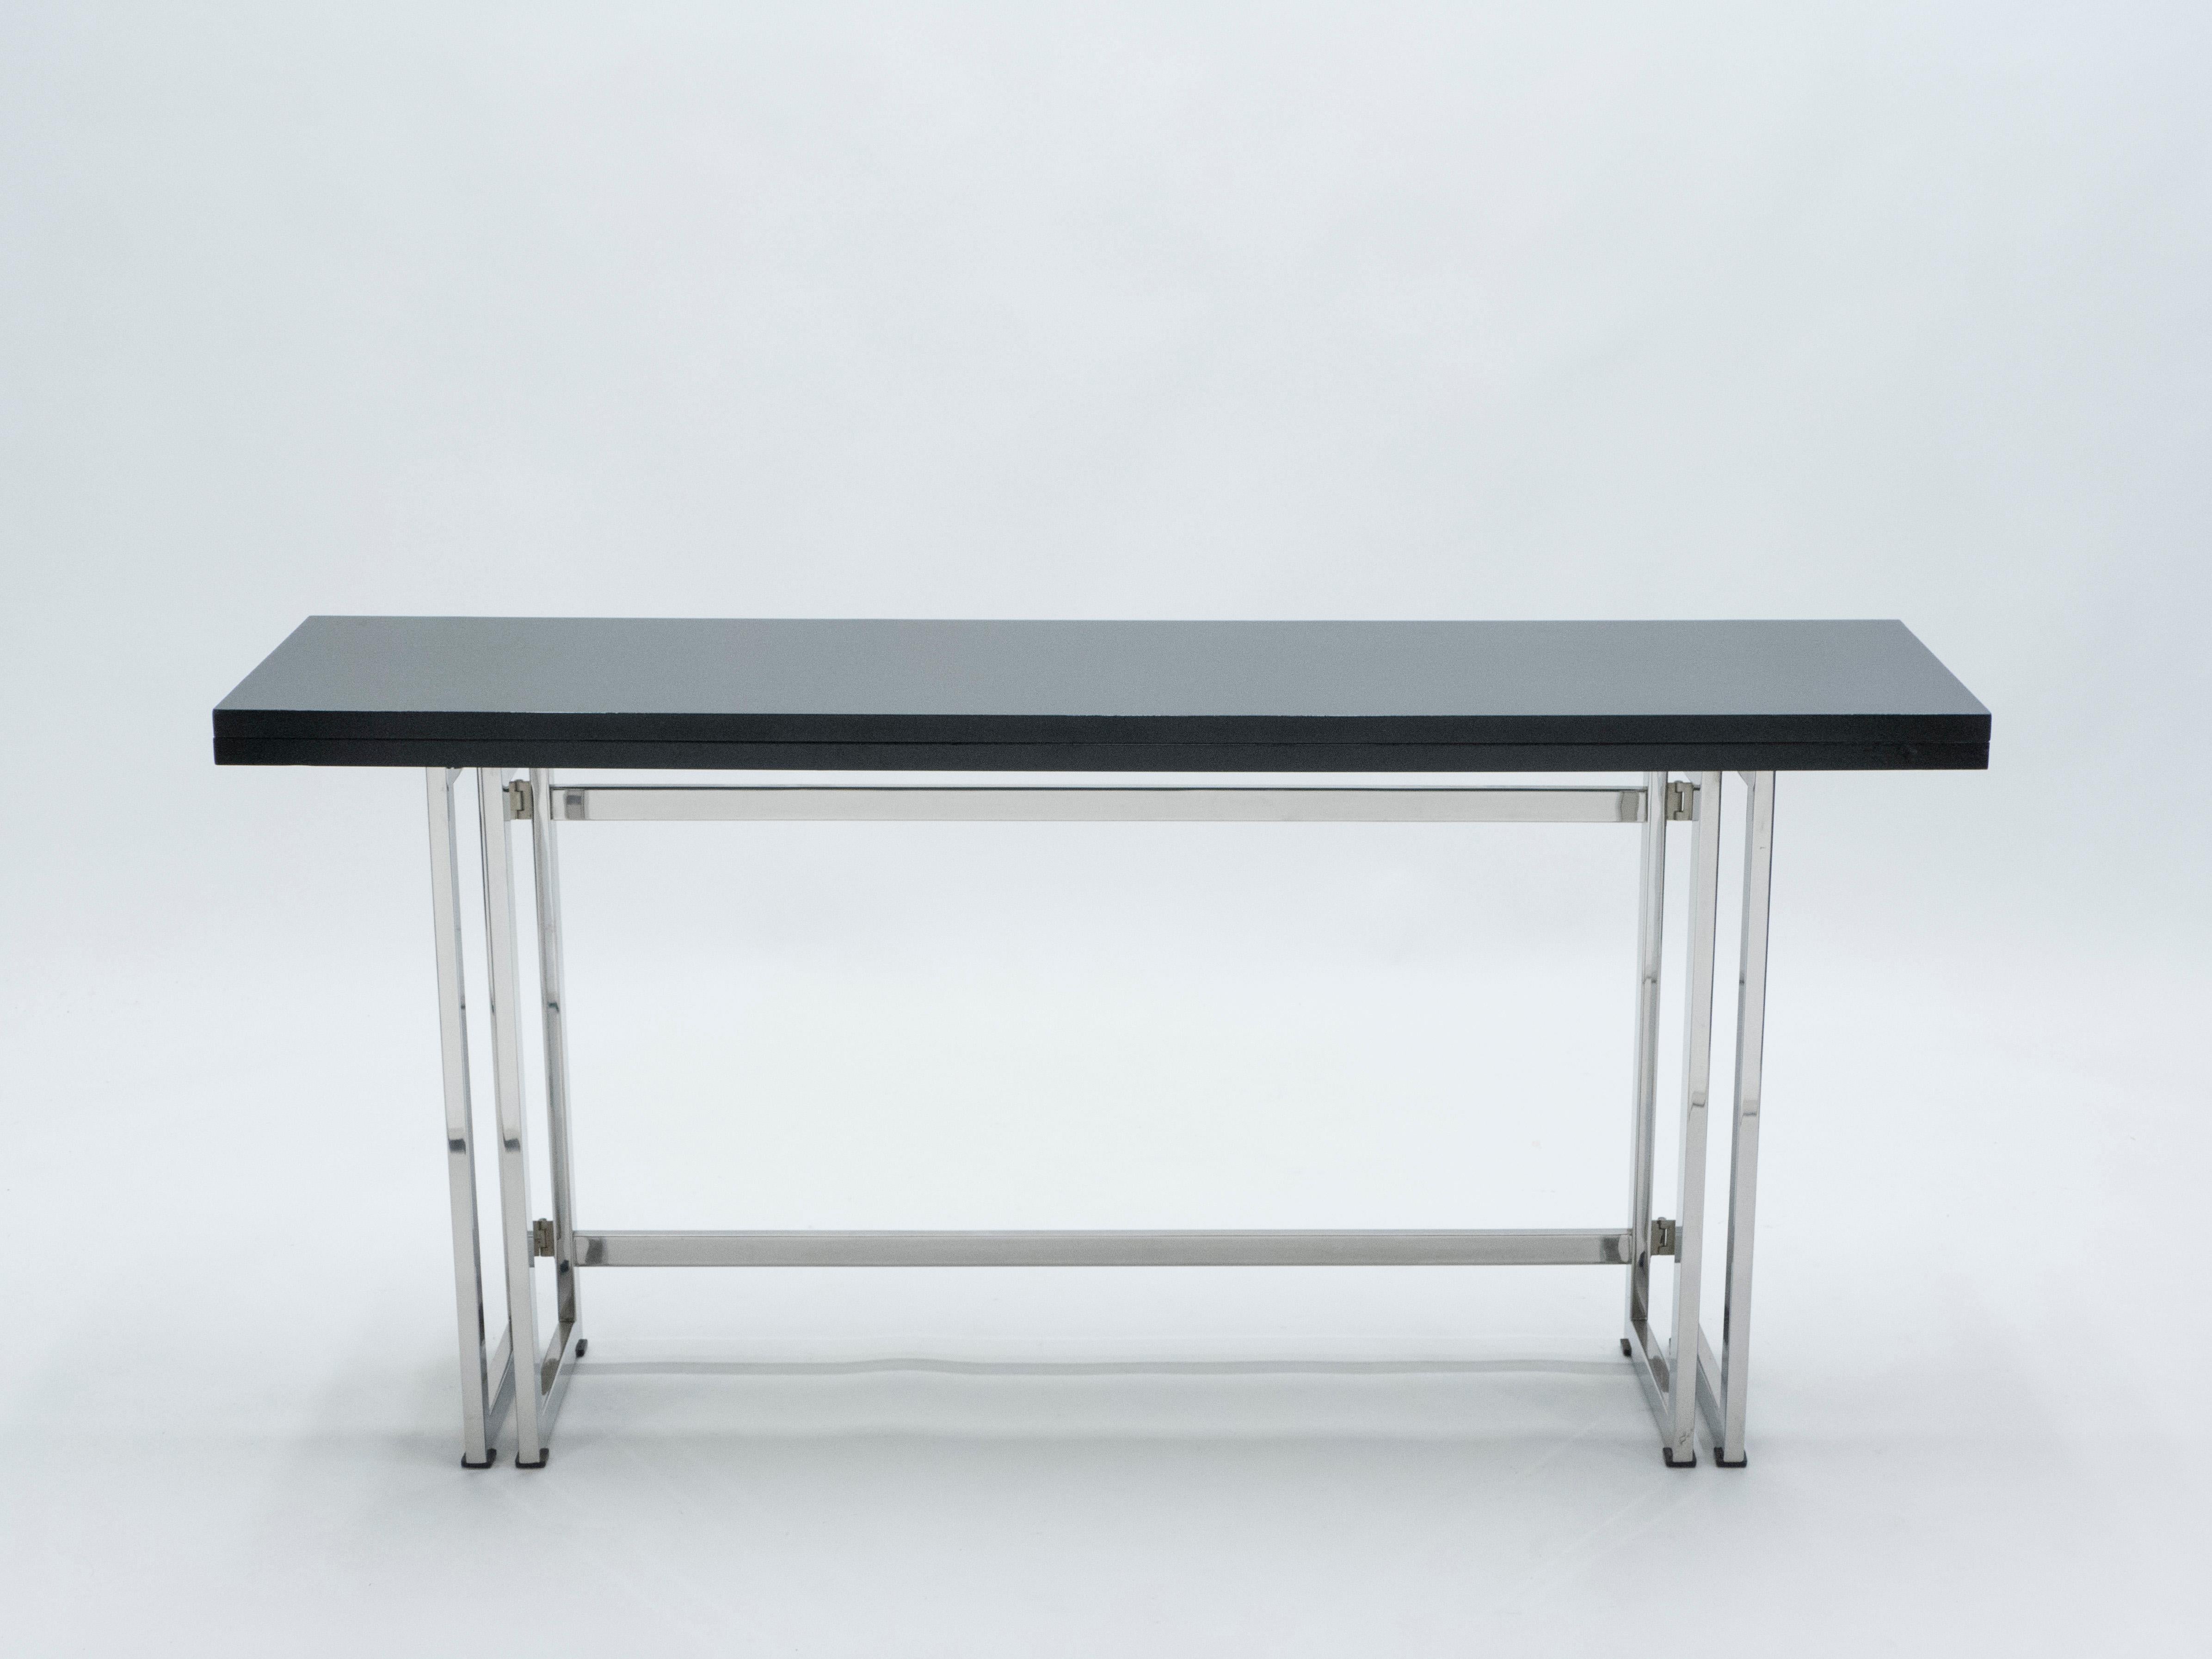 With a beautiful black lacquered top, sharply geometric chrome metal legs and a foldable body to fit your particular spatial needs, this mid-century italian console table by Artelano carries a stellar futuristic mid-century aesthetic into the